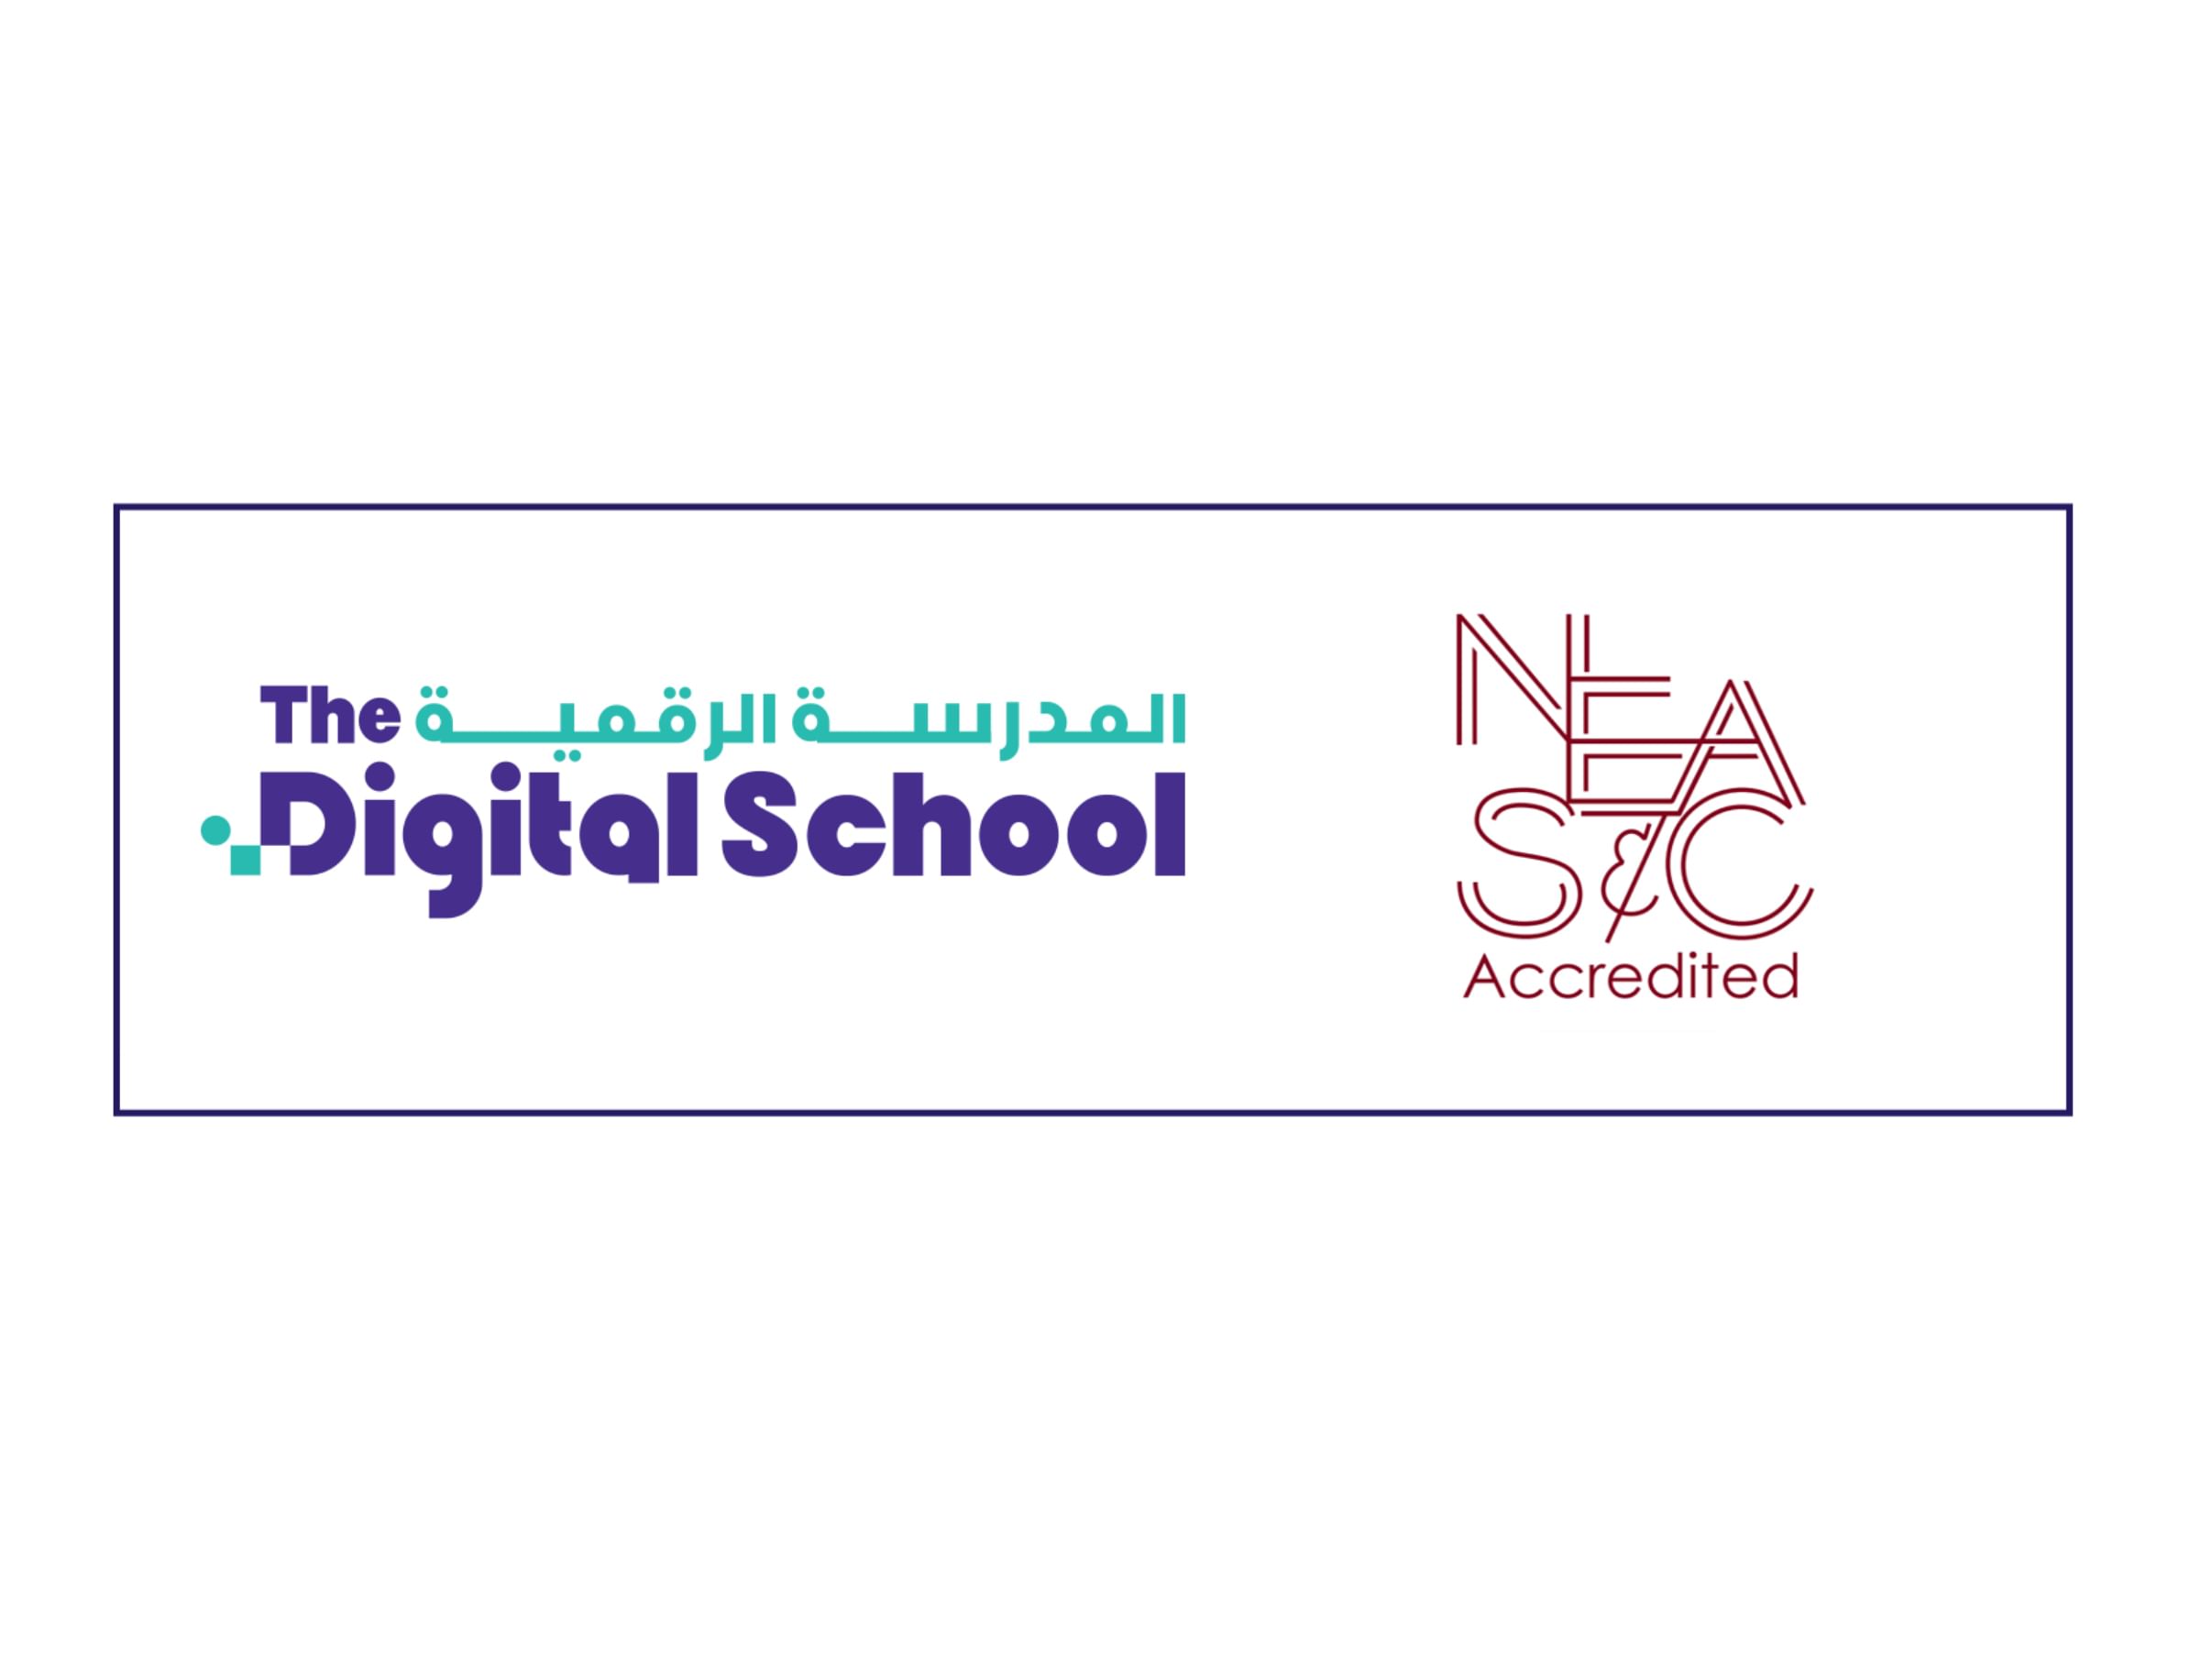 “The Digital School” receives its first international academic accreditation from the “New England Association of Schools and Colleges (NEASC).”